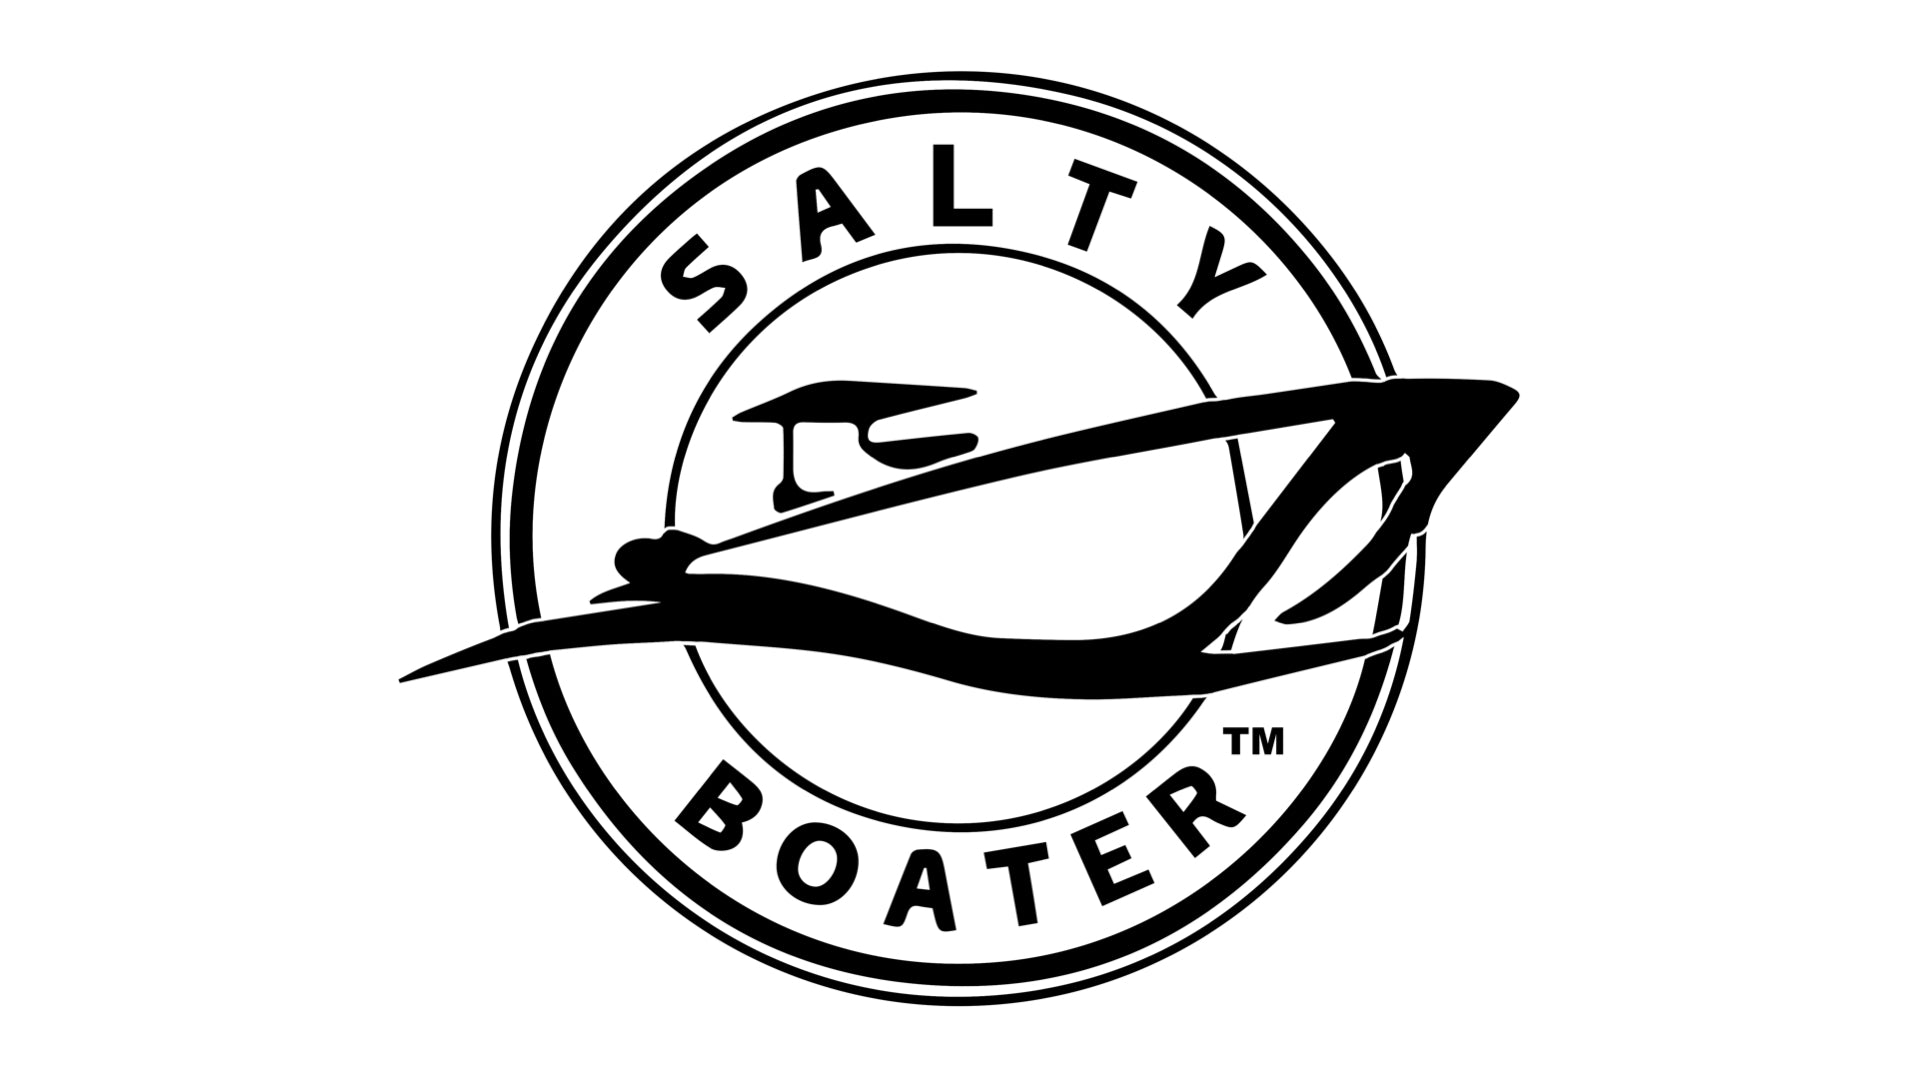 Salty Boater